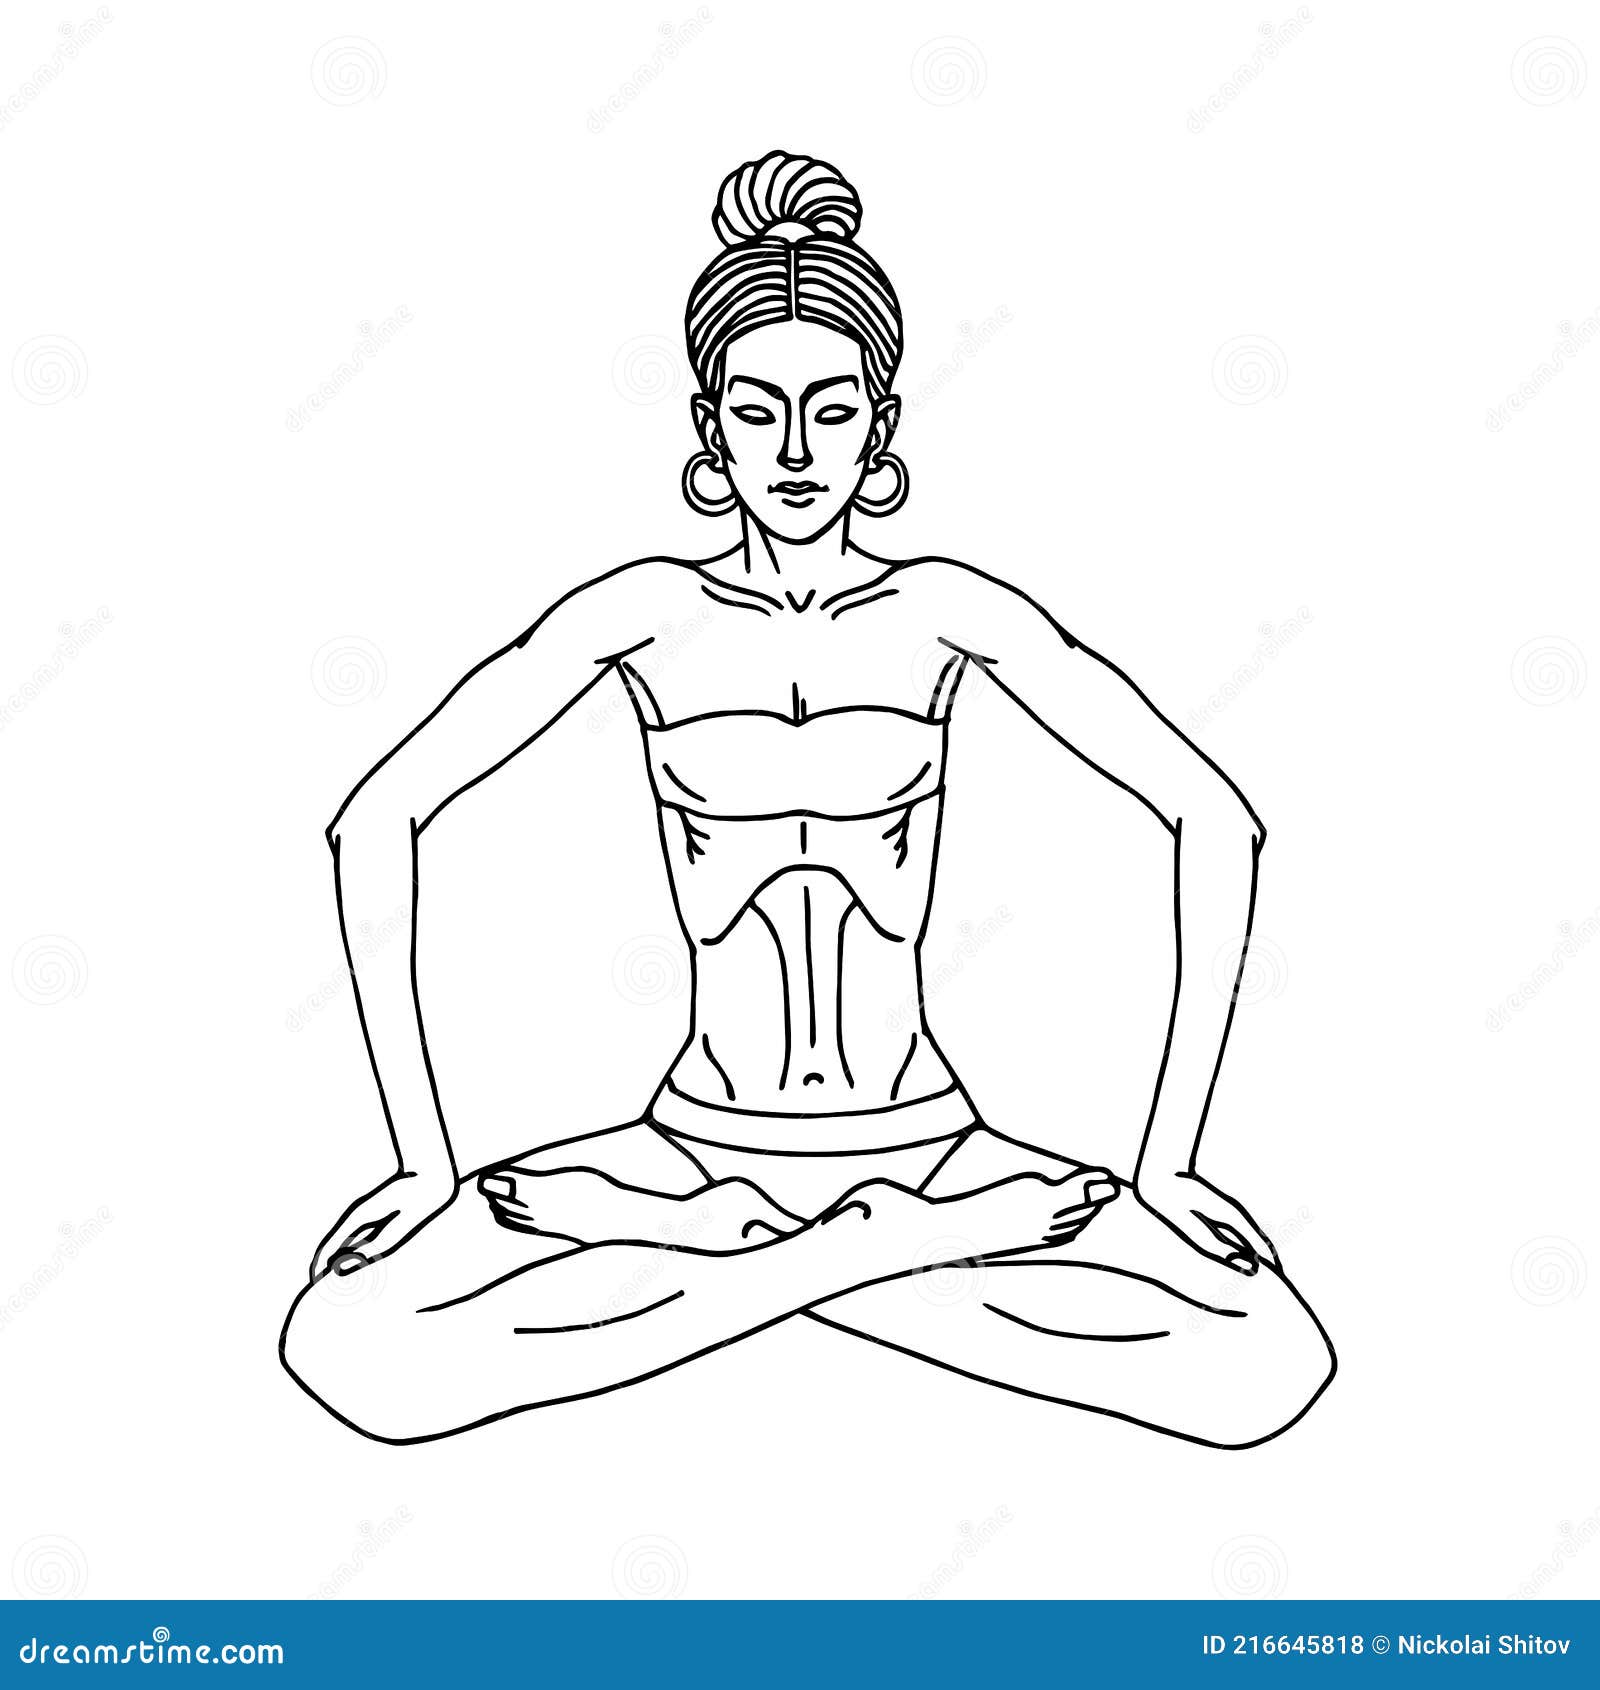 sitting young yogi girl lotus position does belly vacuum muscle wave vector illustration black ink contour lines 216645818